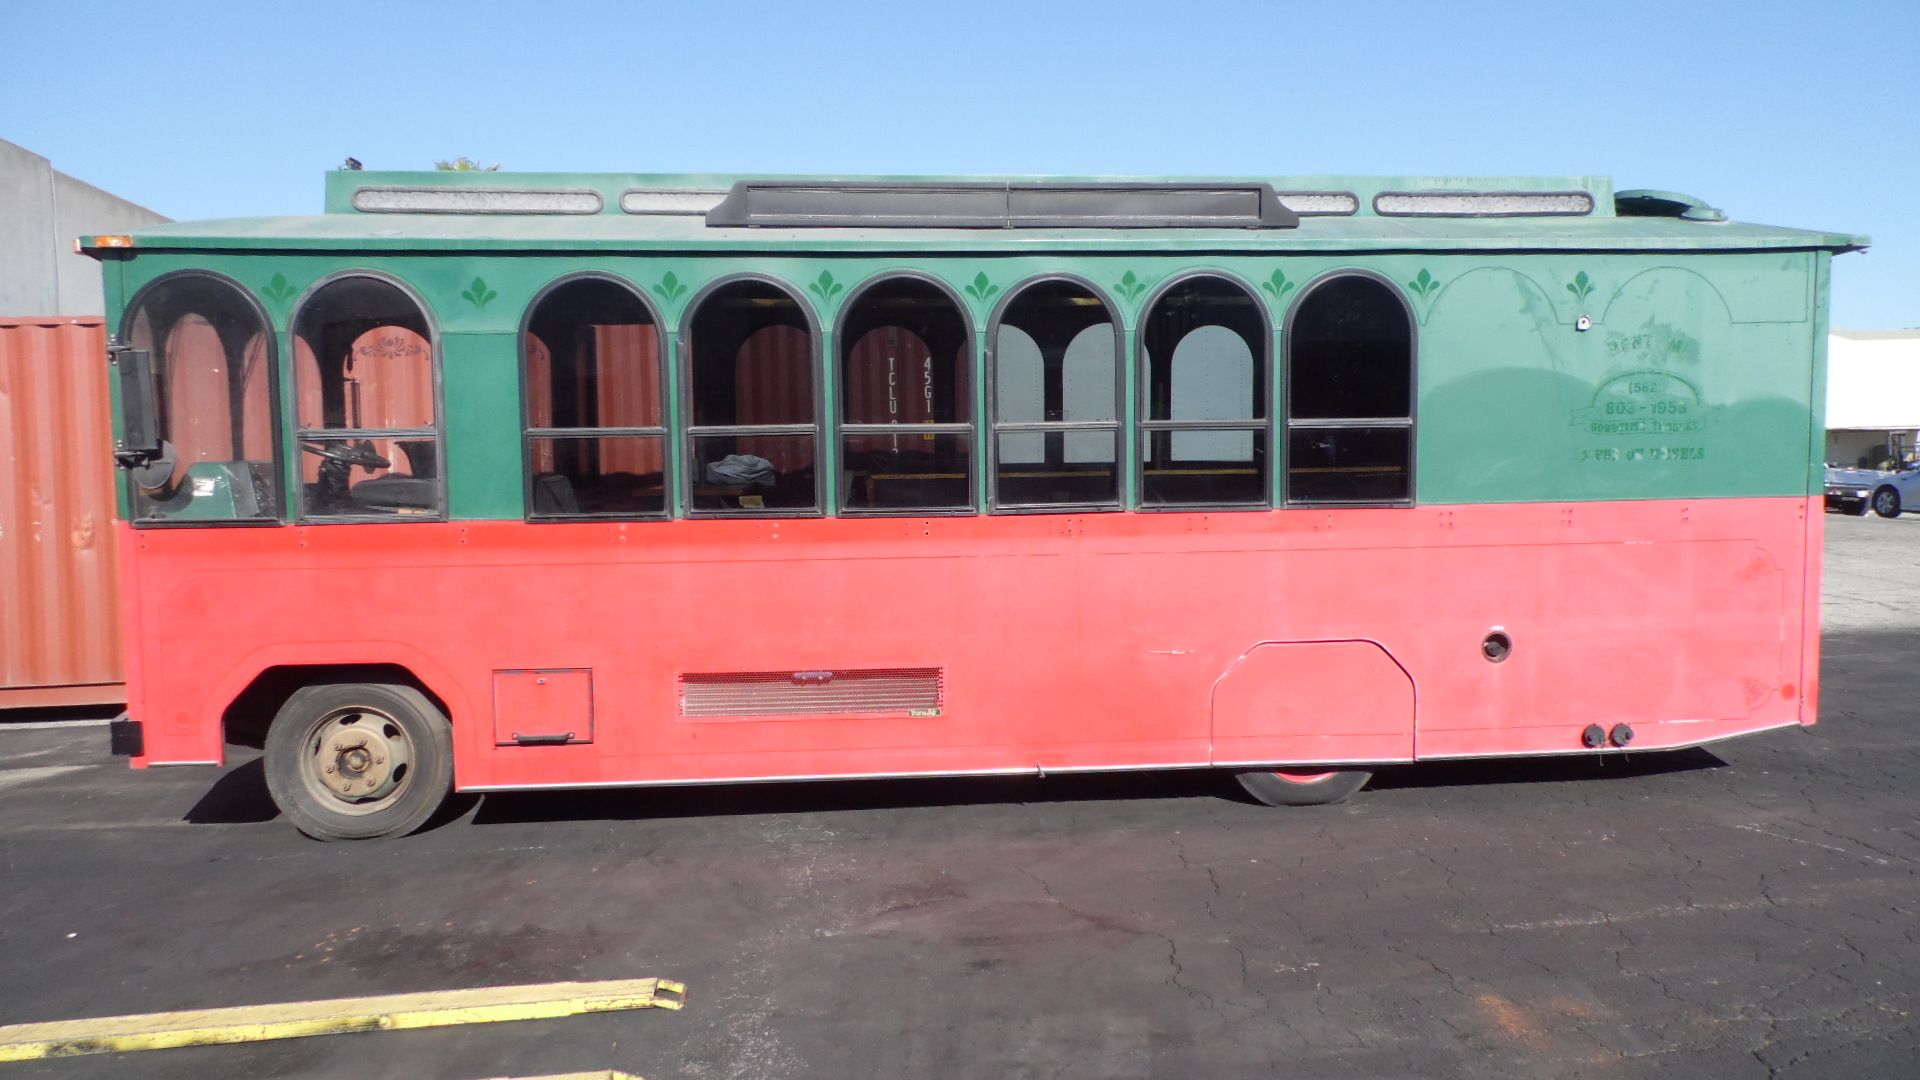 27FT. "PARTY TROLLEY" - W/ LOUNGE SEATING / BAR / BATHROOM (NEEDS WORK INFO. UPON REQUEST) - Image 2 of 13